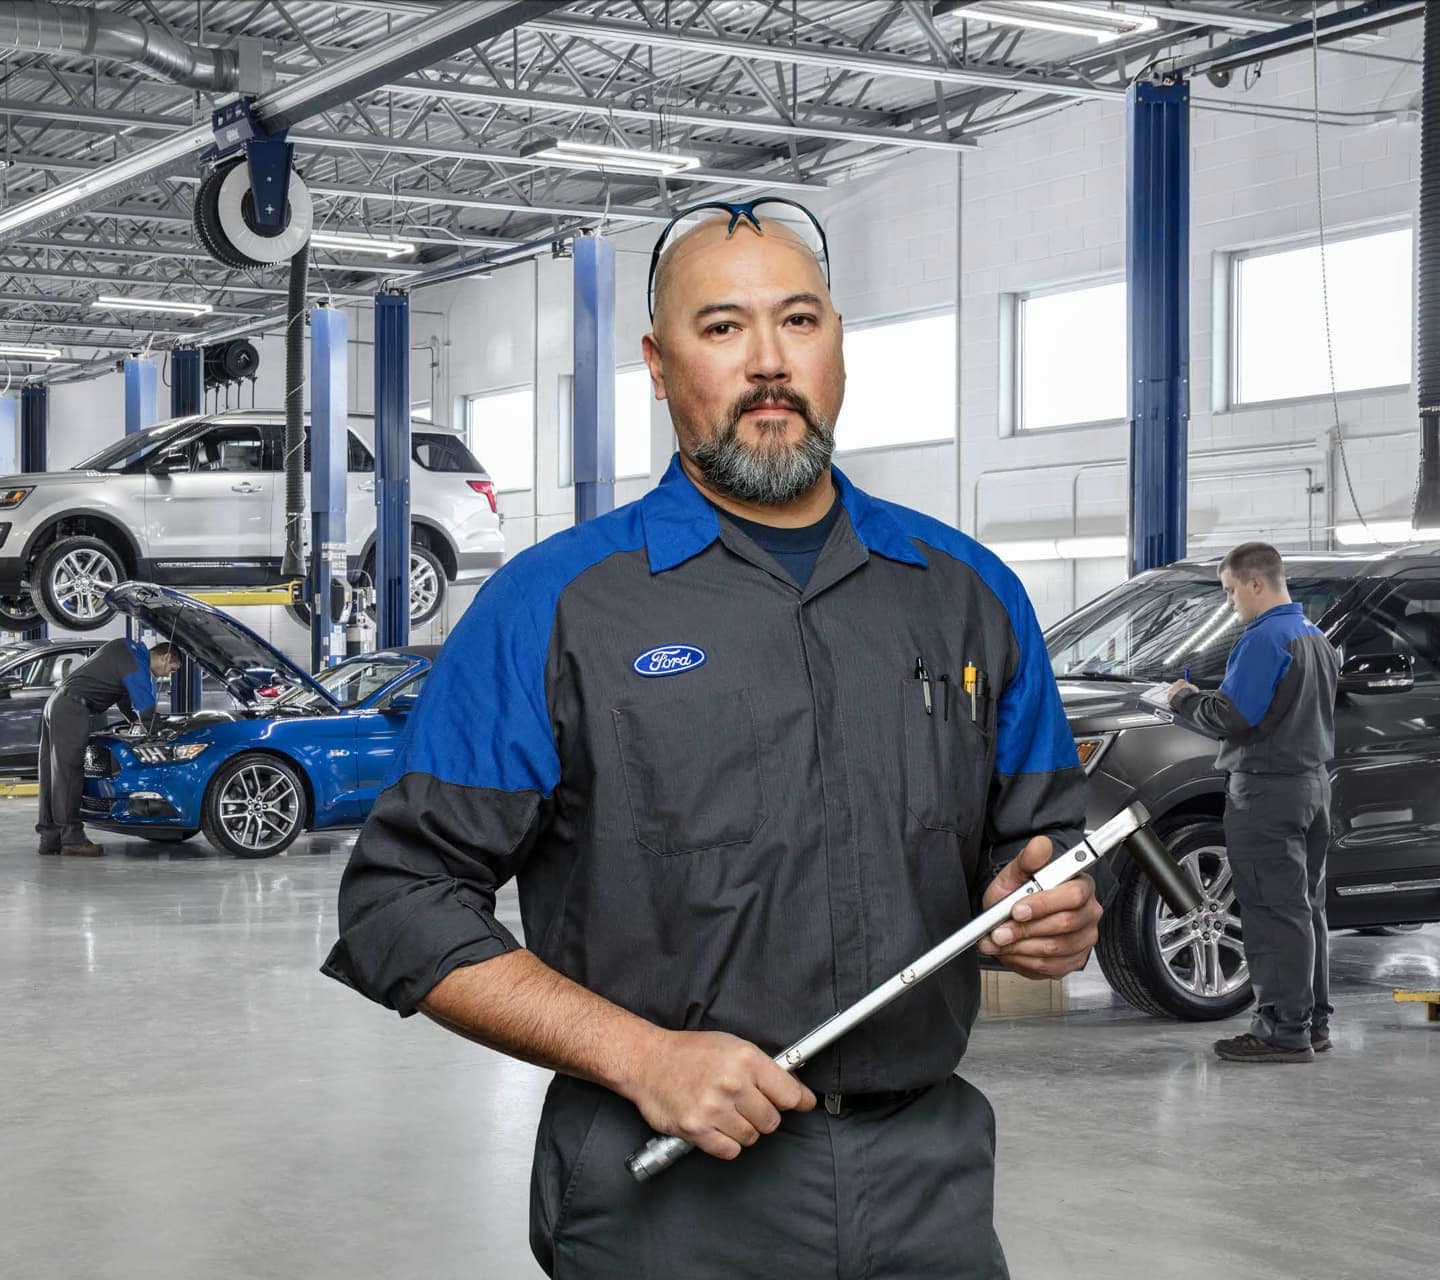 Mechanic holding a tool in the Ford Service Center